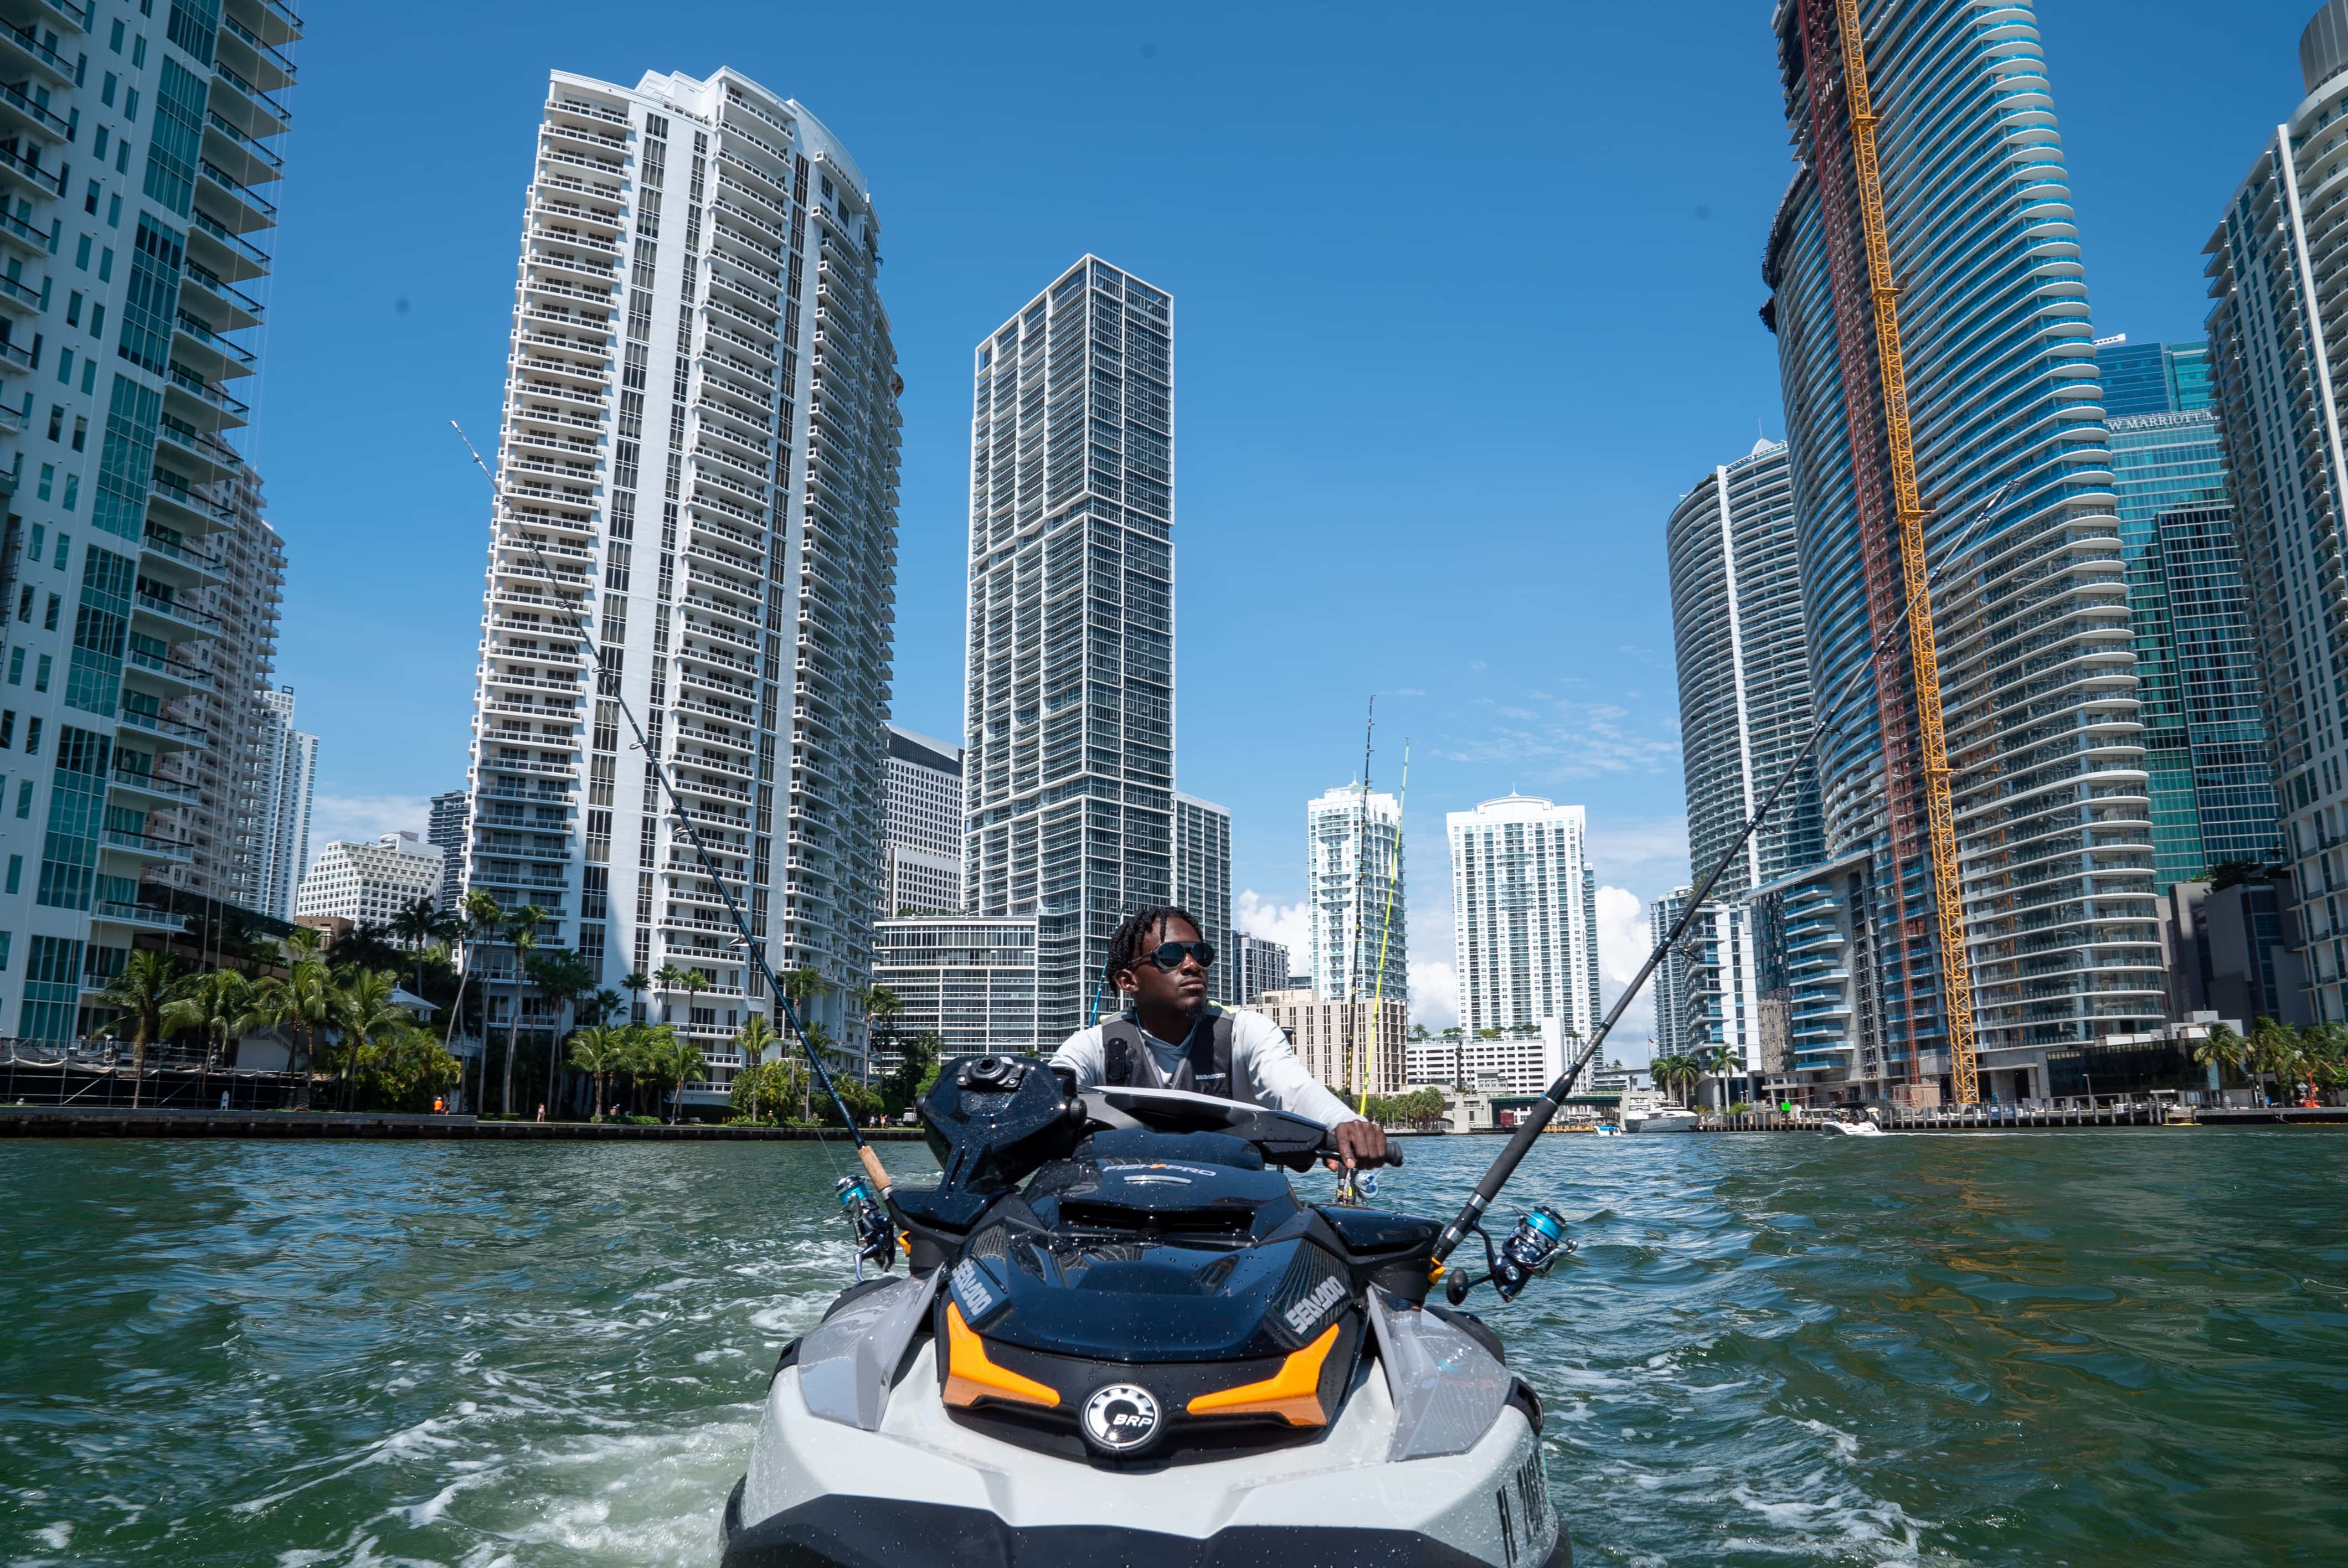 Emmanuel Williams riding on Sea-Doo FISHPRO with a city in the background